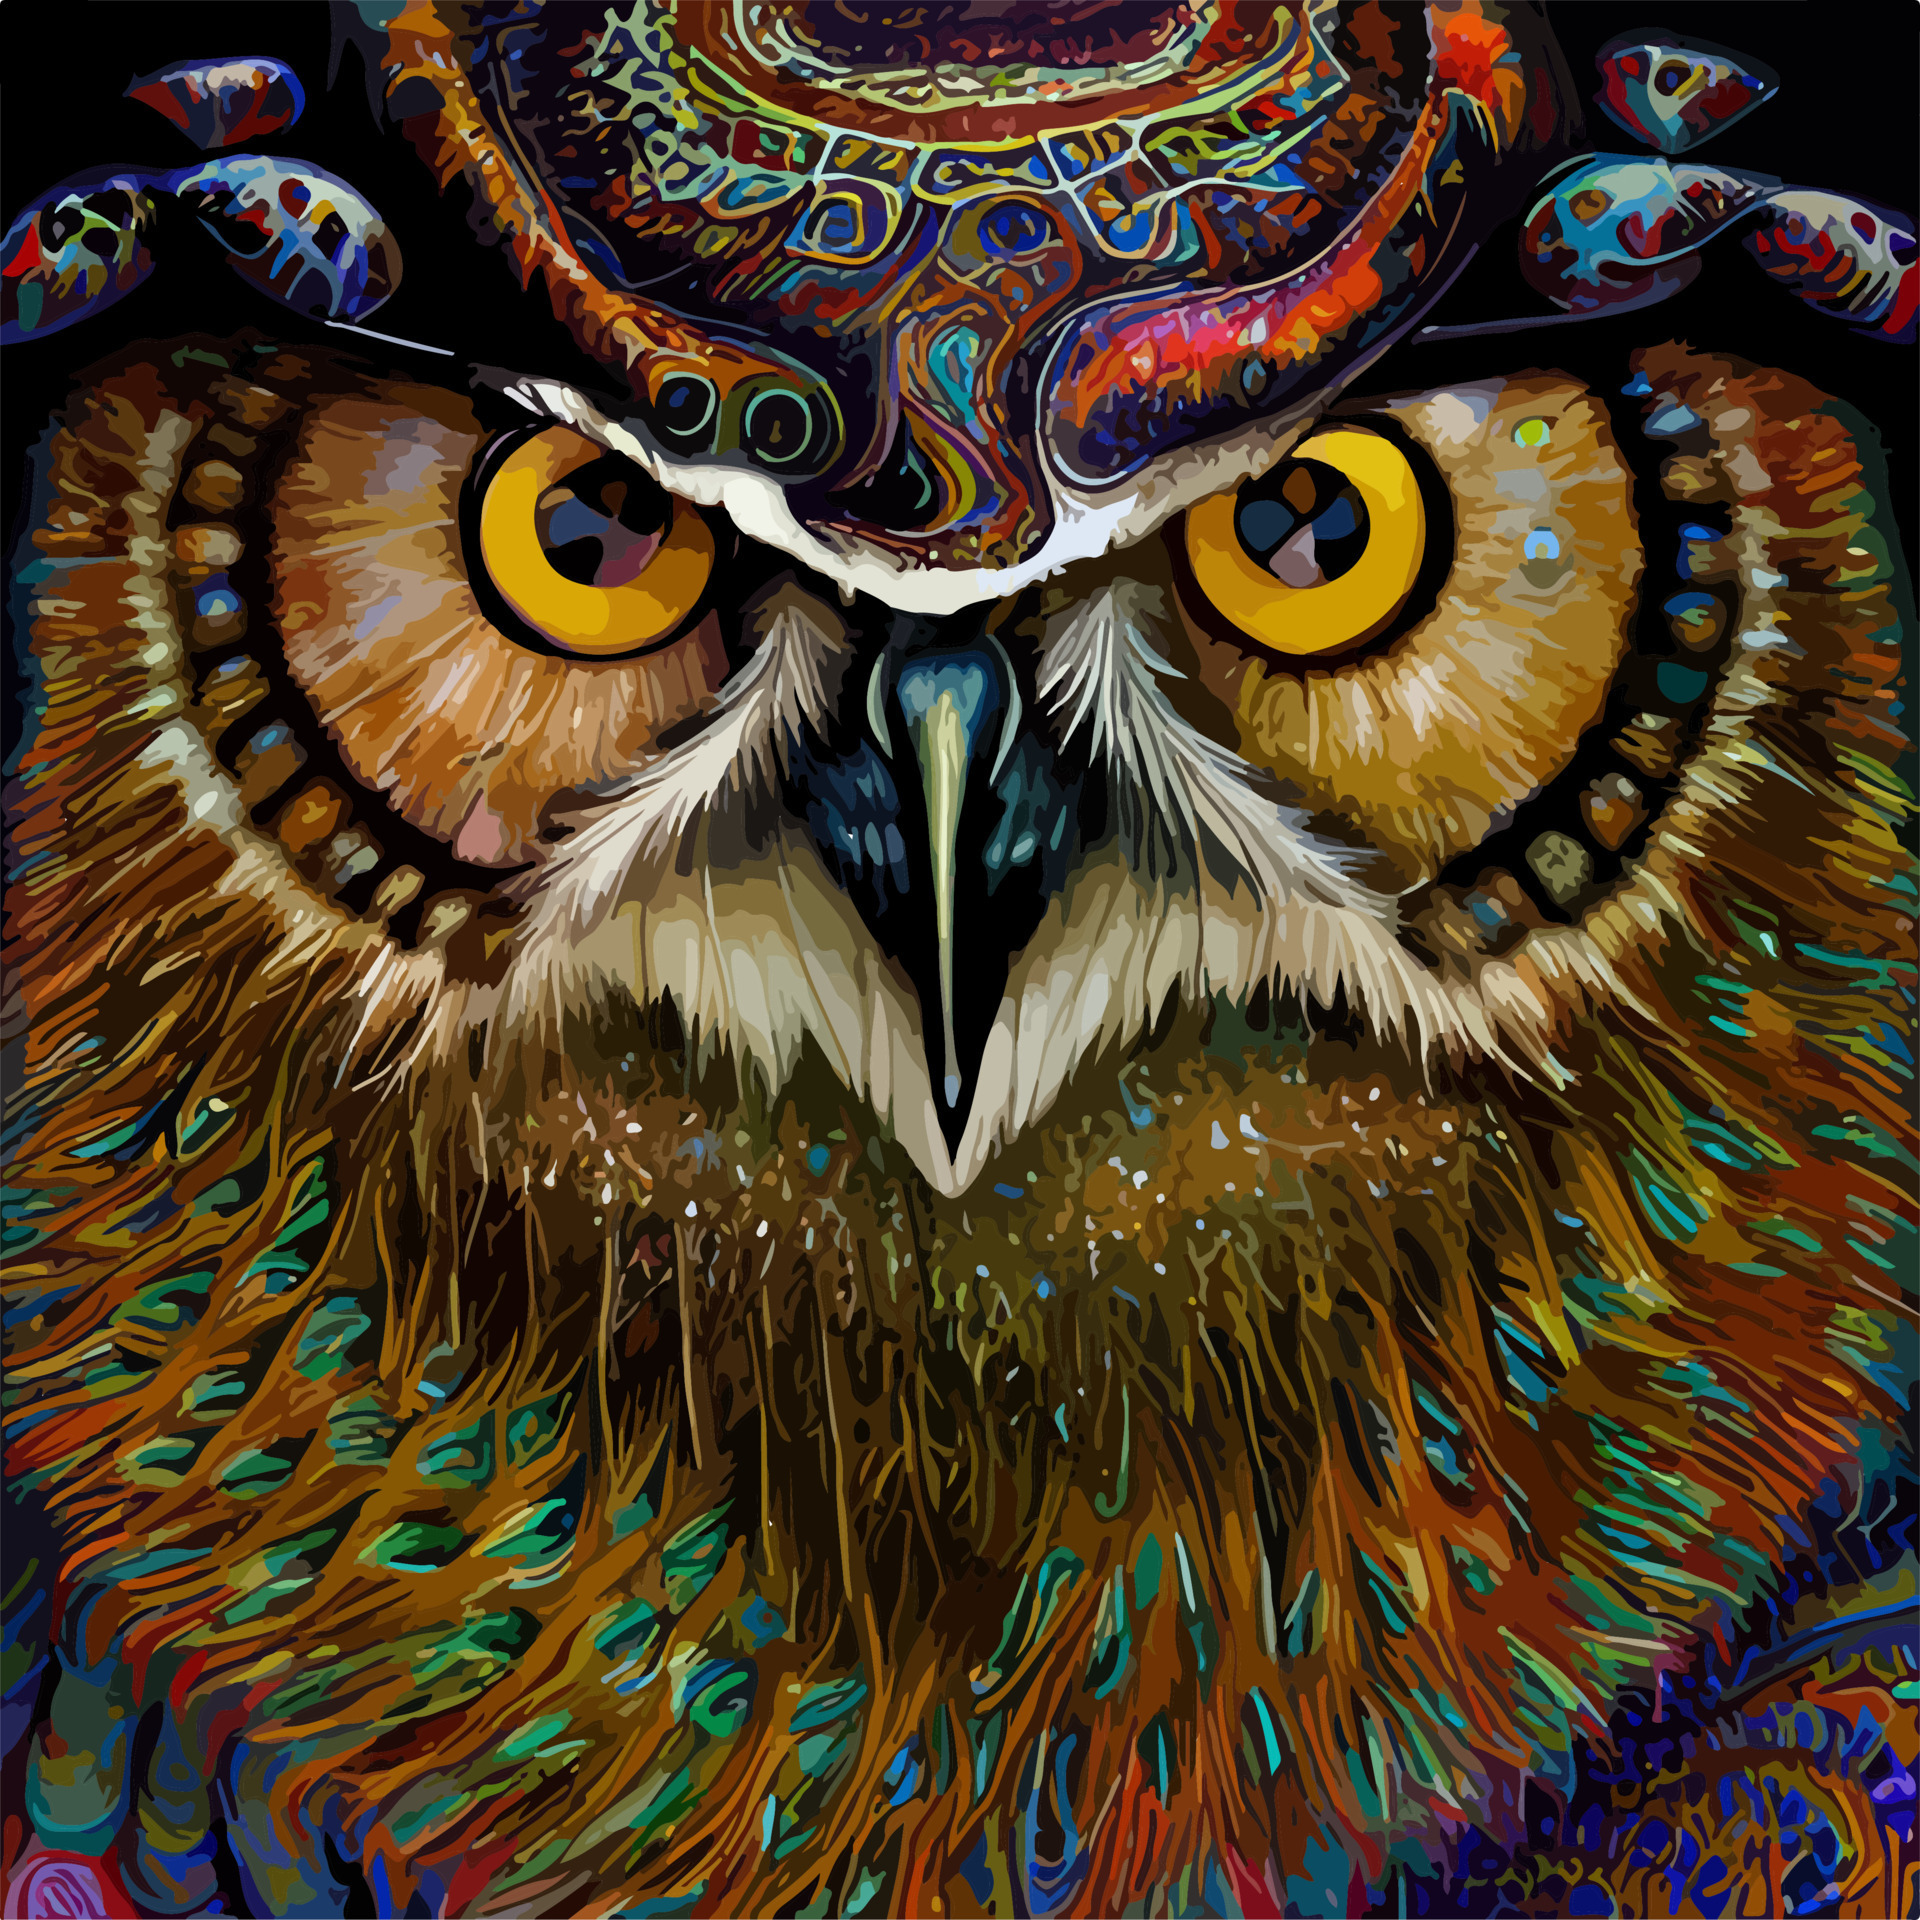 Download Caption Stunning and Colorful Owl Hd Tattoo Art Image Wallpaper   Wallpaperscom